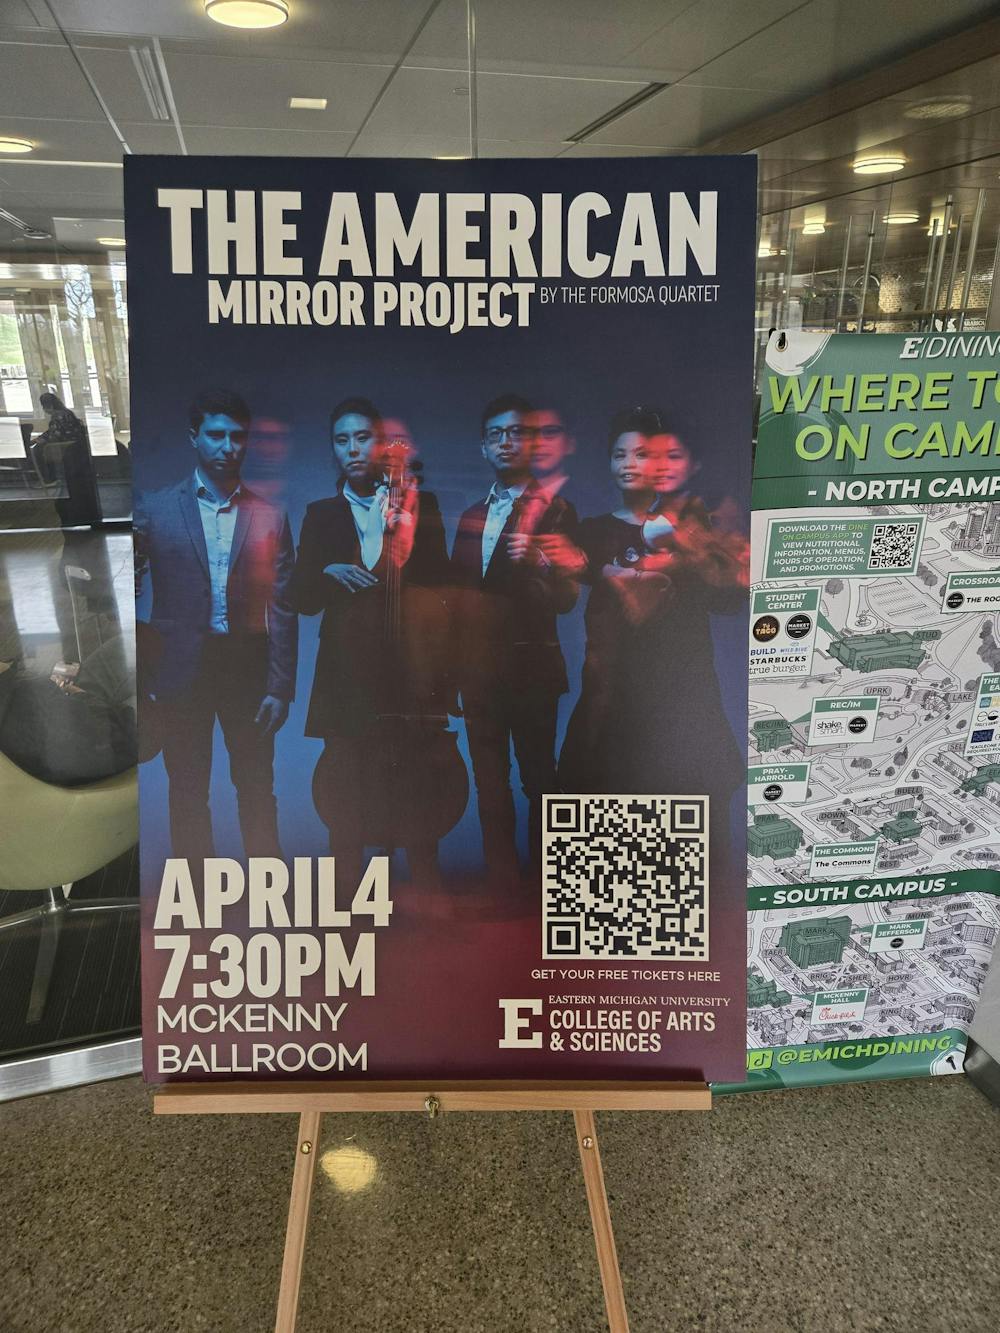 The Formosa Quartet brings an end to their EMU residency with their American Mirror Project performance 